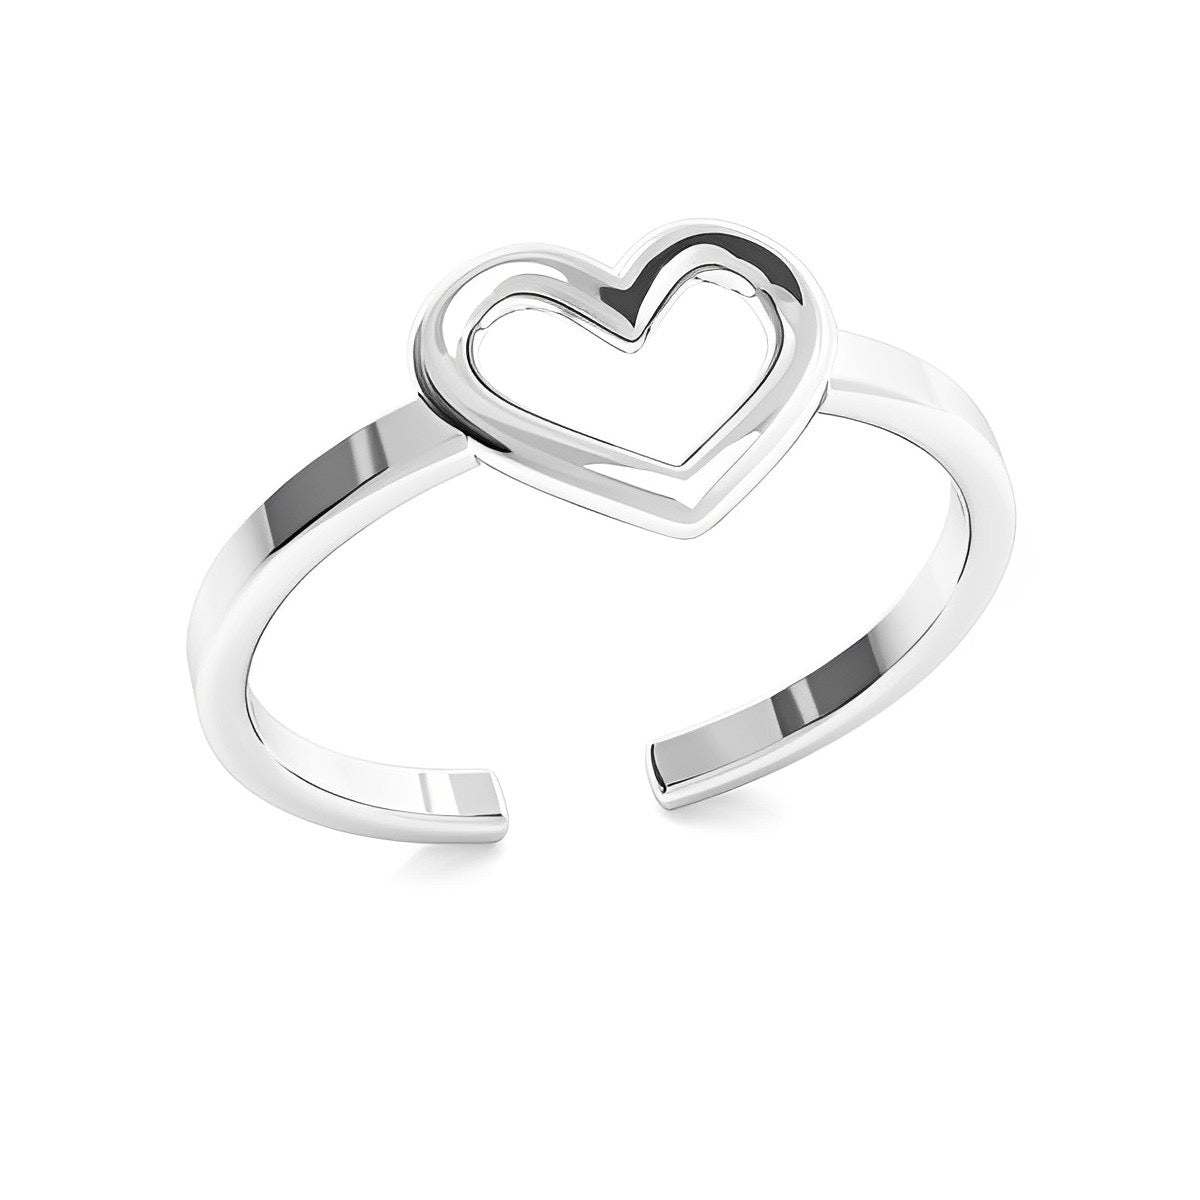 INEL ARGINT 925 INIMA rings > heart ring > silver ring > gifts for her > gifts for girls > gifts for moms > gifts for best friend > birthday gift Maison la Stephanie   